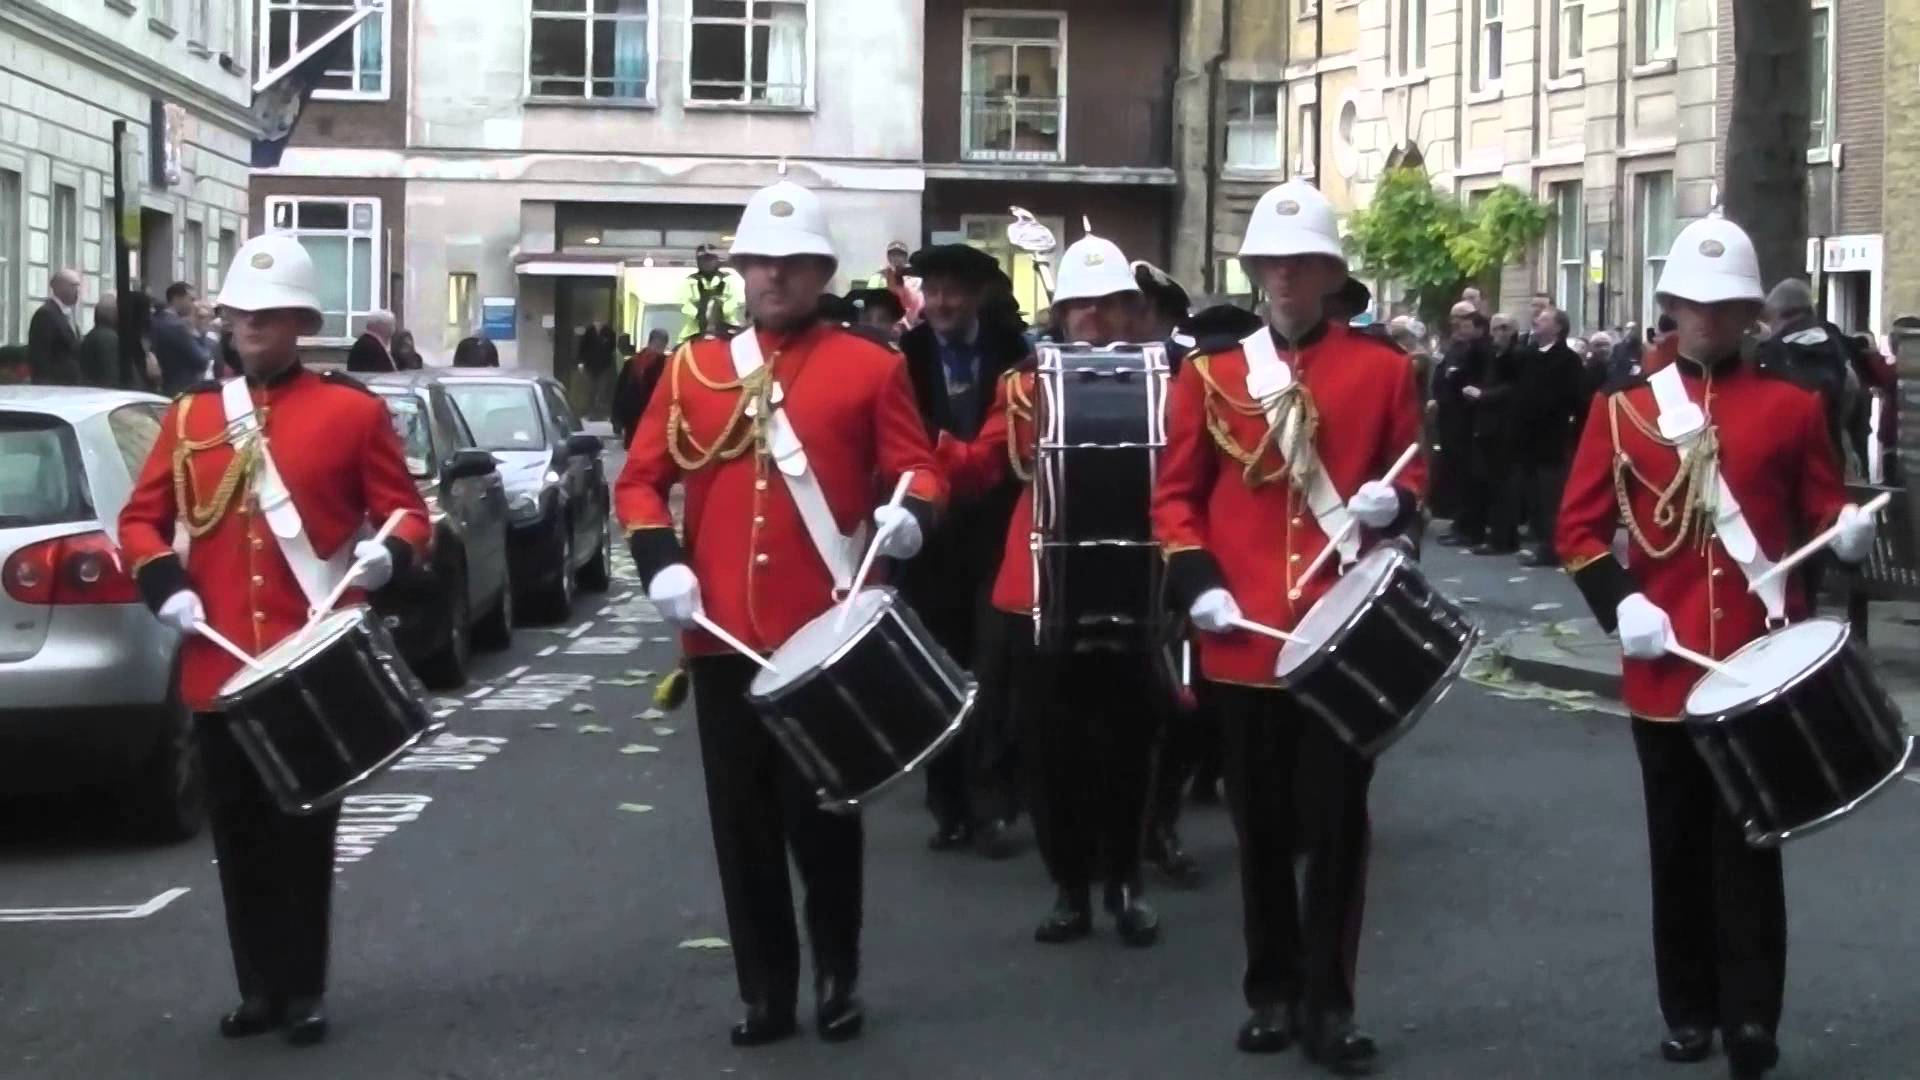 British Military Marching Band Drums Corps - YouTube